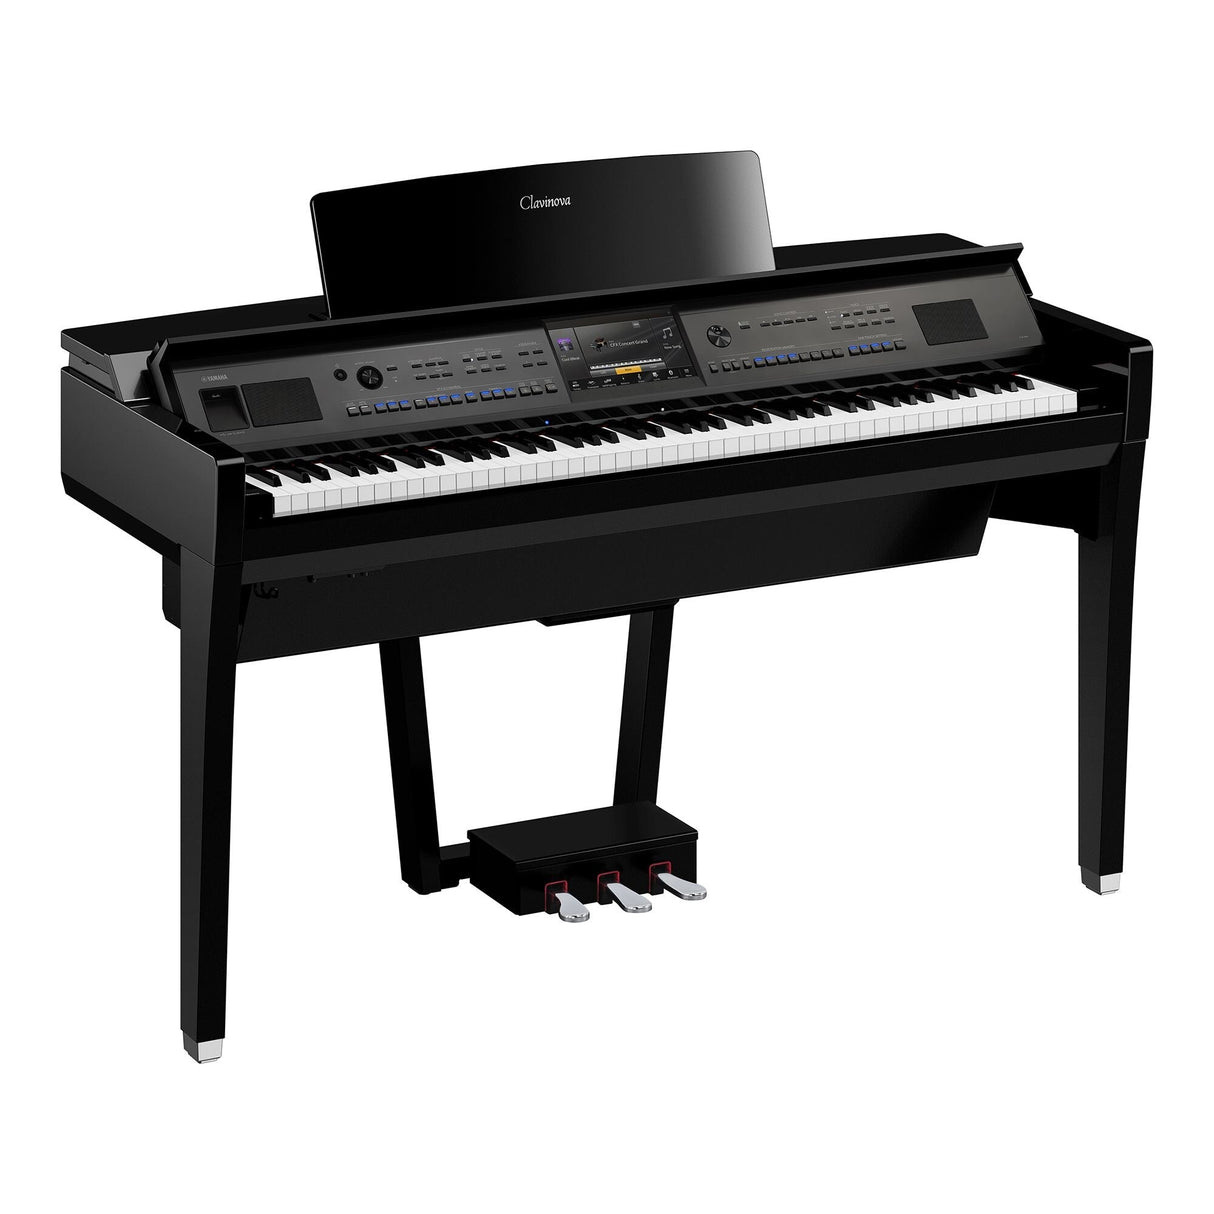 A modern black digital Clavinova piano with a full keyboard and multiple control options, displayed against a white background.